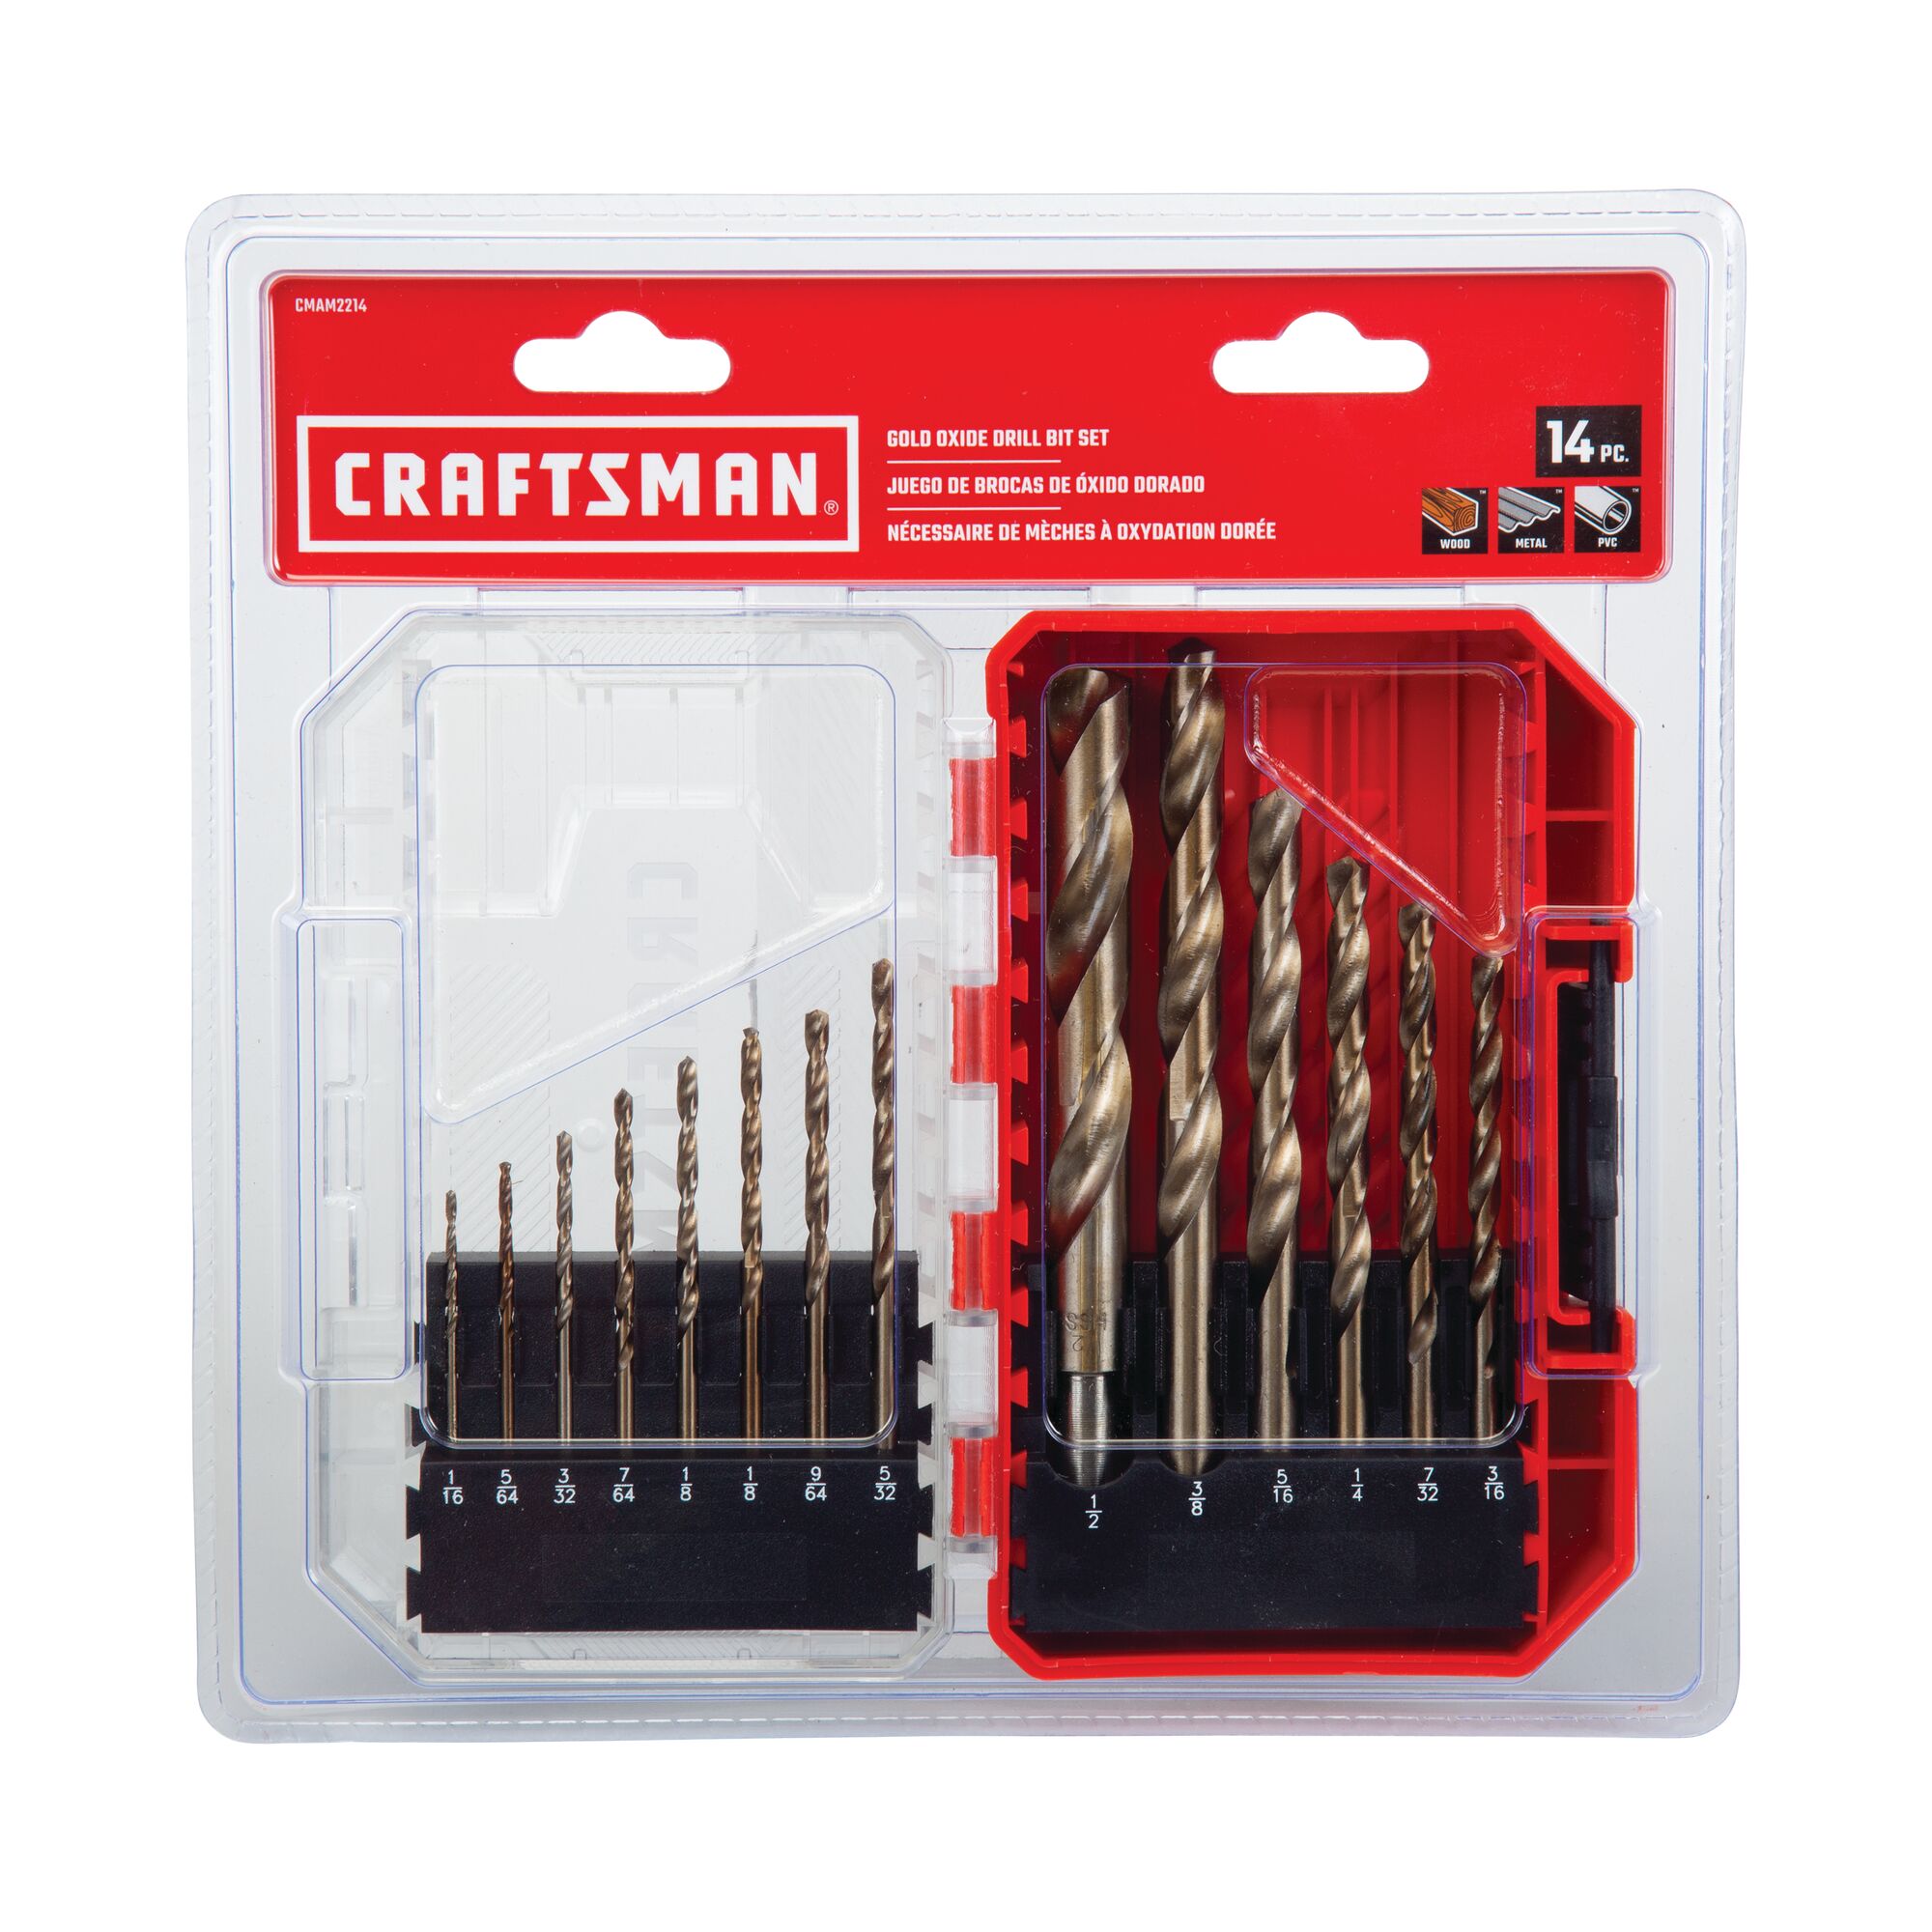 14 piece gold oxide drill bit set in plastic packaging.